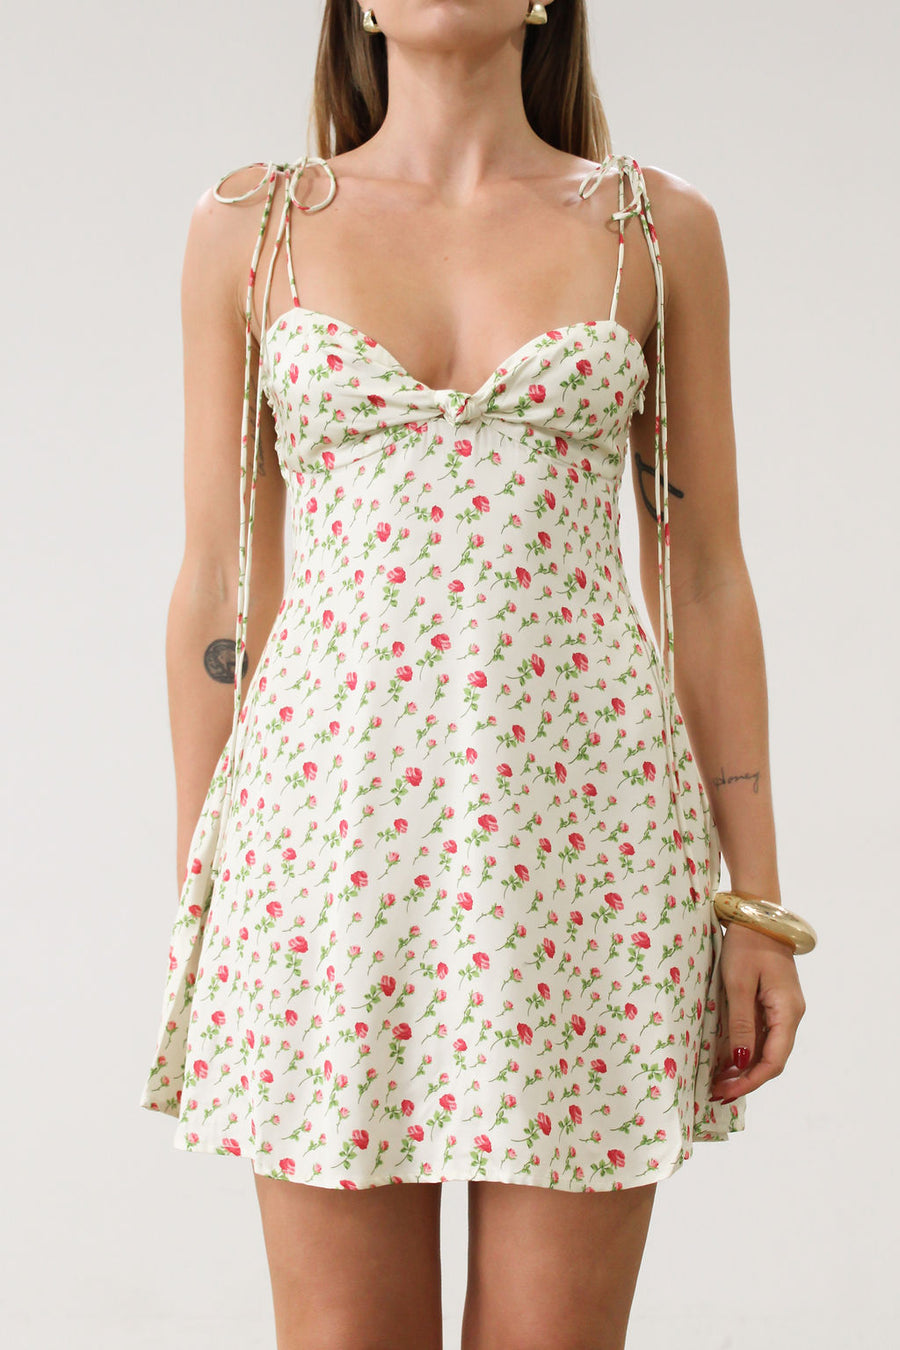 for love and lemons dress. Floral printed satin dress. Adjustable tie straps. Front knot detail. Side hook and eye and zipper closures. Unlined.